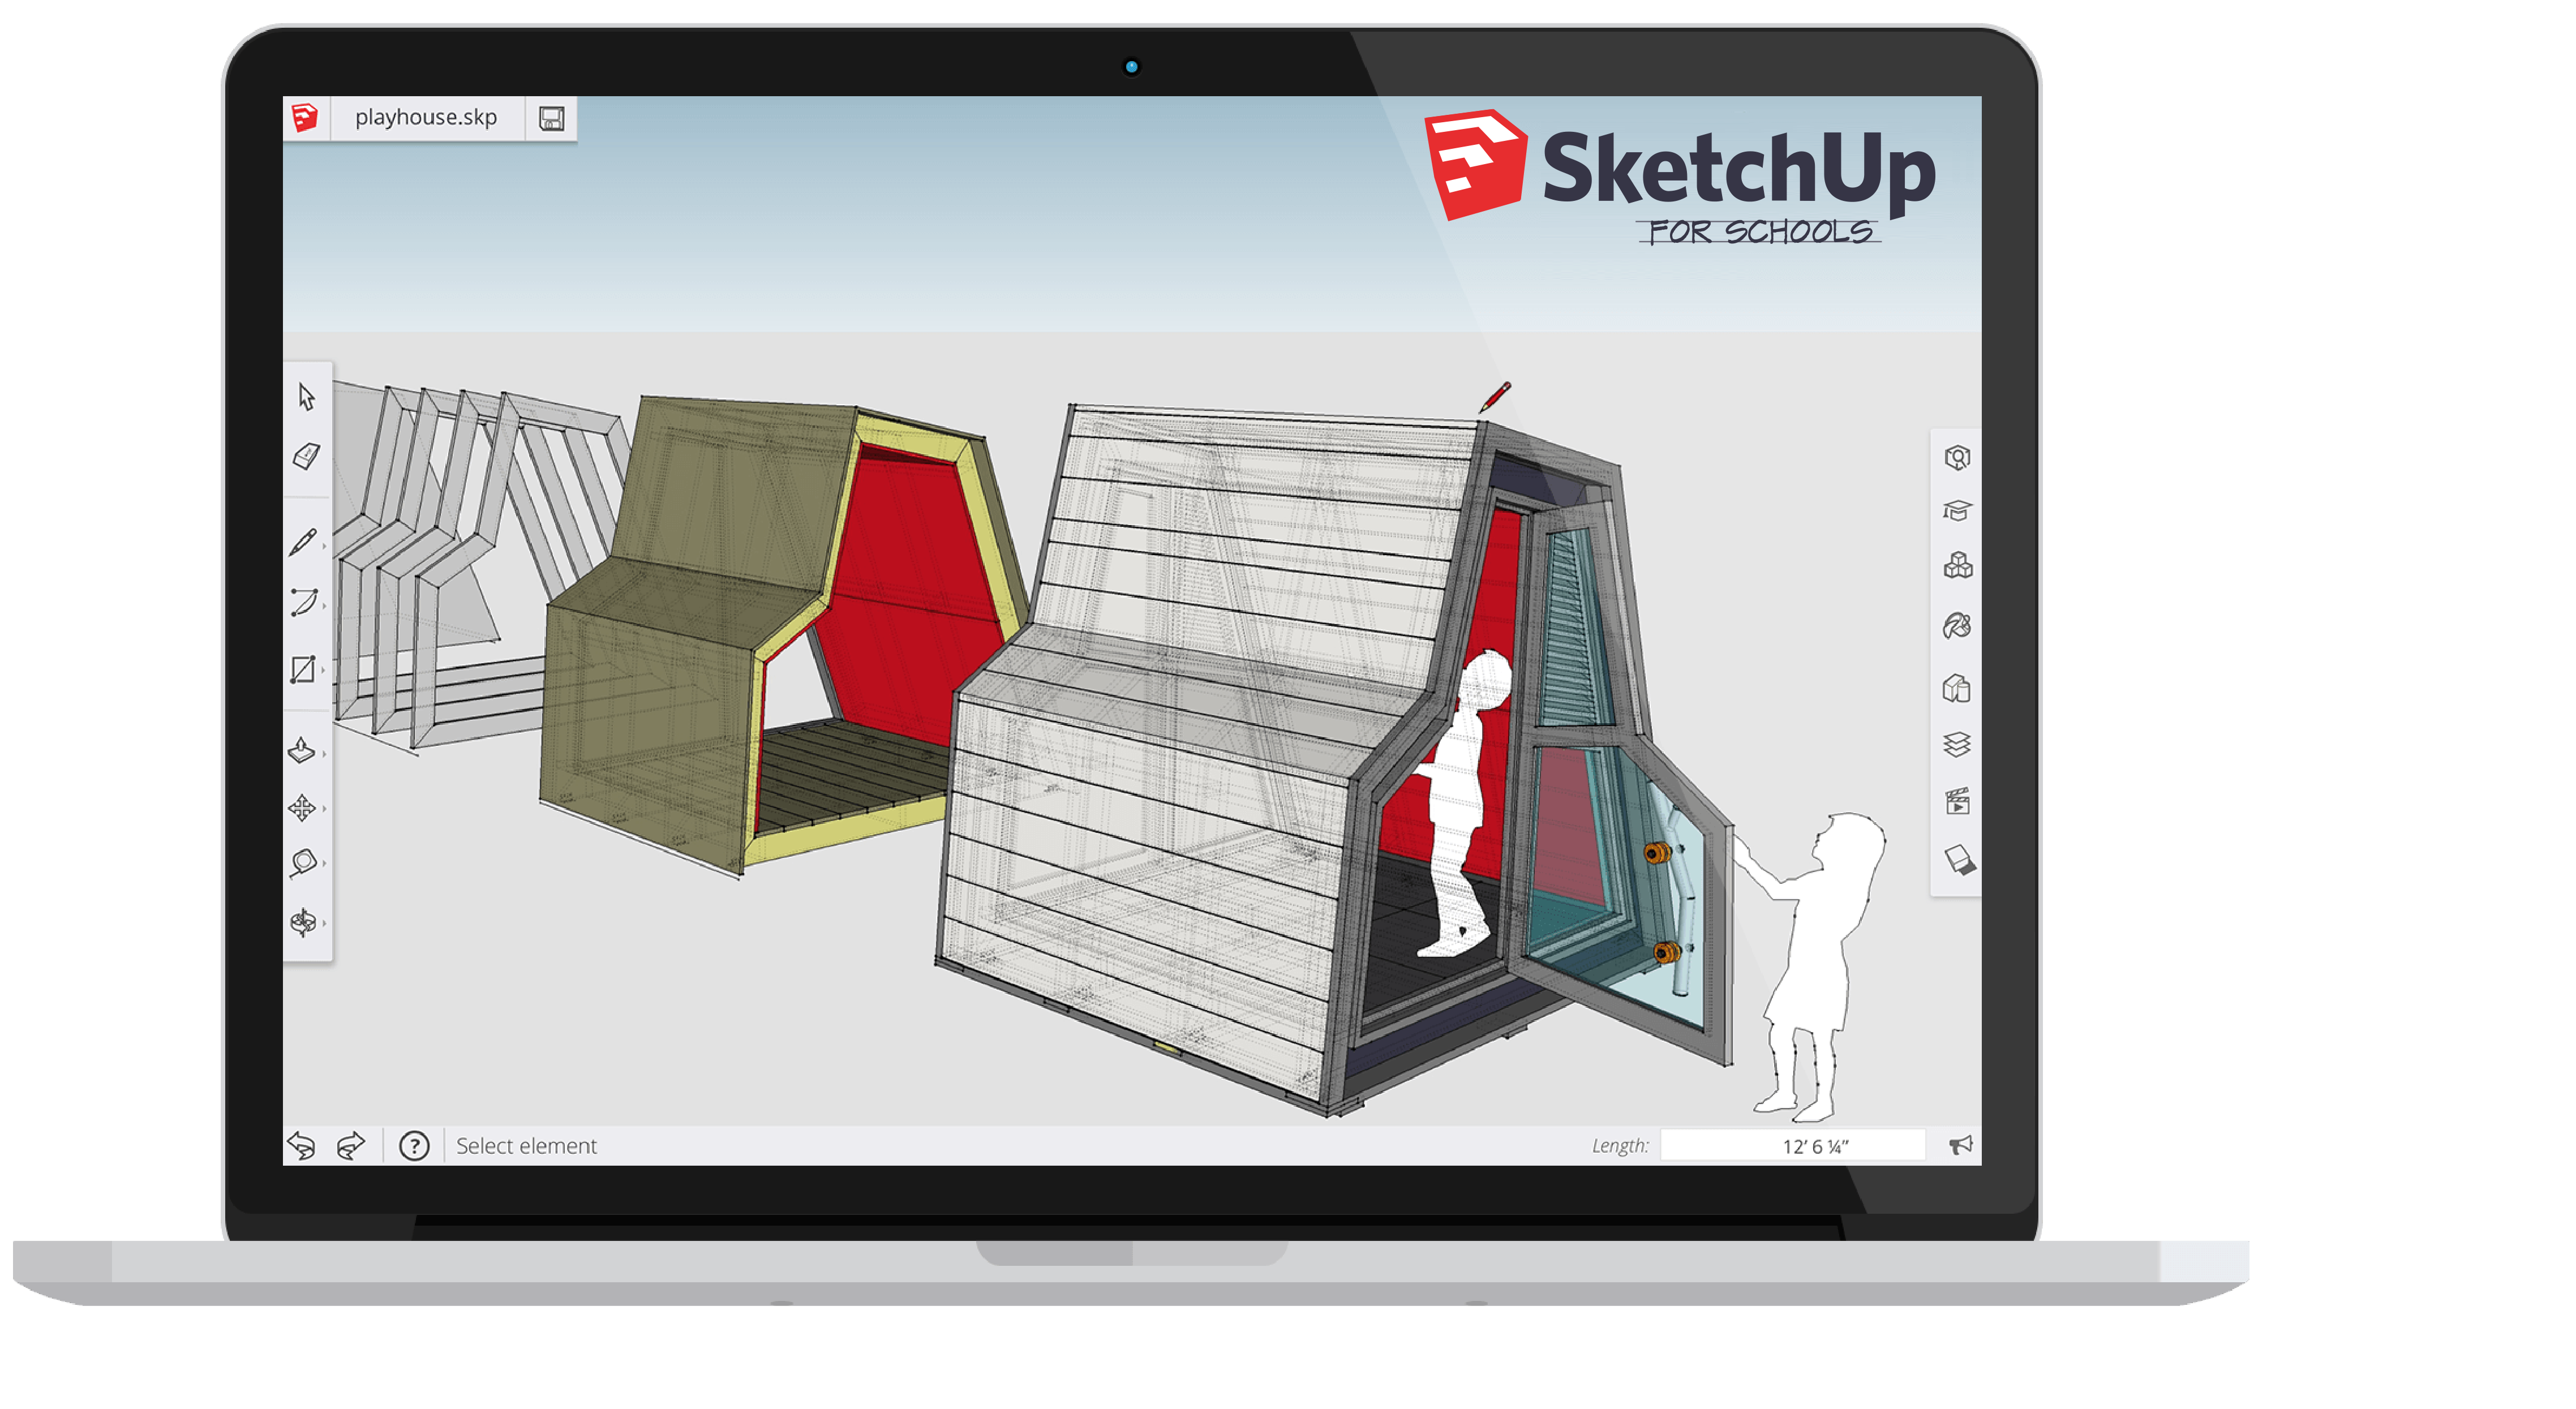 SketchUp for Schools is a browser-based version of SketchUp available to primary and secondary schools.